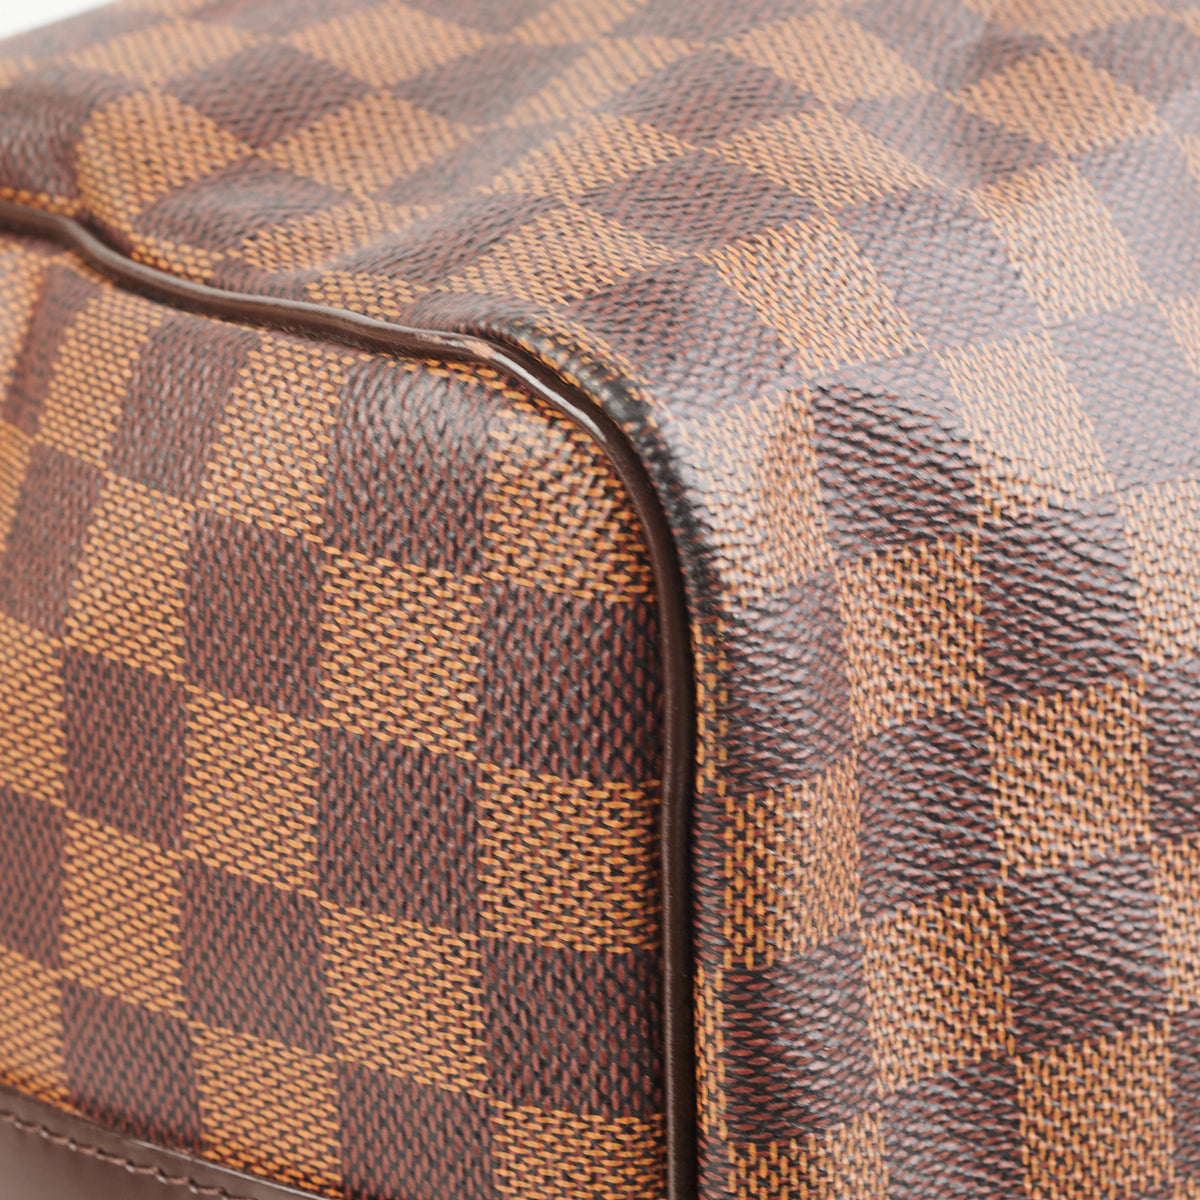 Auth Louis Vuitton Speedy Bandouliere 35 Damier Ebene N41182 With Invoice  LD347